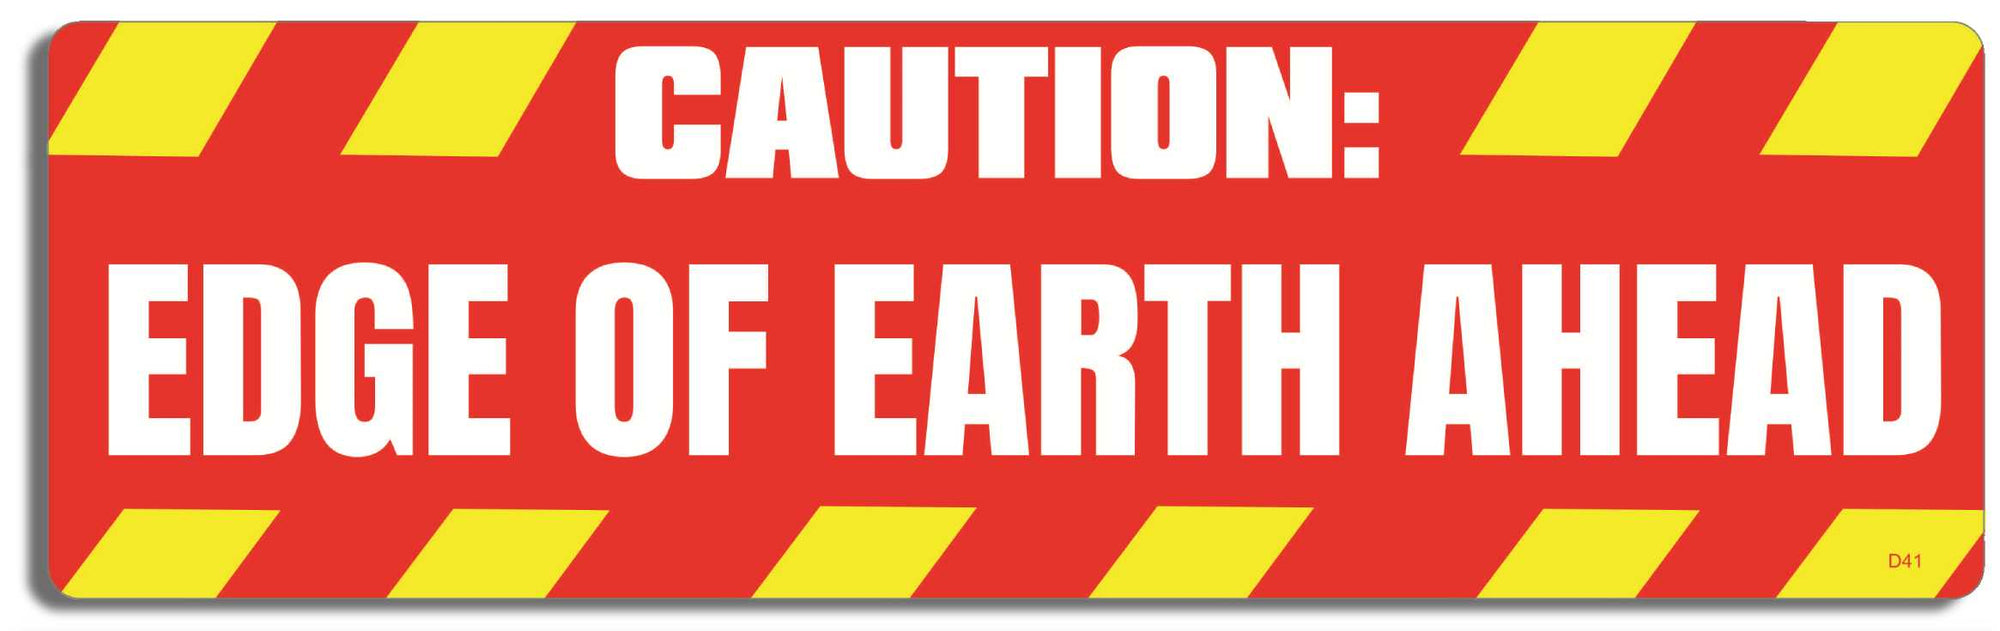 Caution: Edge of Earth Ahead - 3" x 10" Bumper Sticker--Car Magnet- -  Decal Bumper Sticker-funny Bumper Sticker Car Magnet Caution: Edge of Earth Ahead-  Decal for carsdrive safely, Driving, Funny, safe driving, tailgaters, tailgating